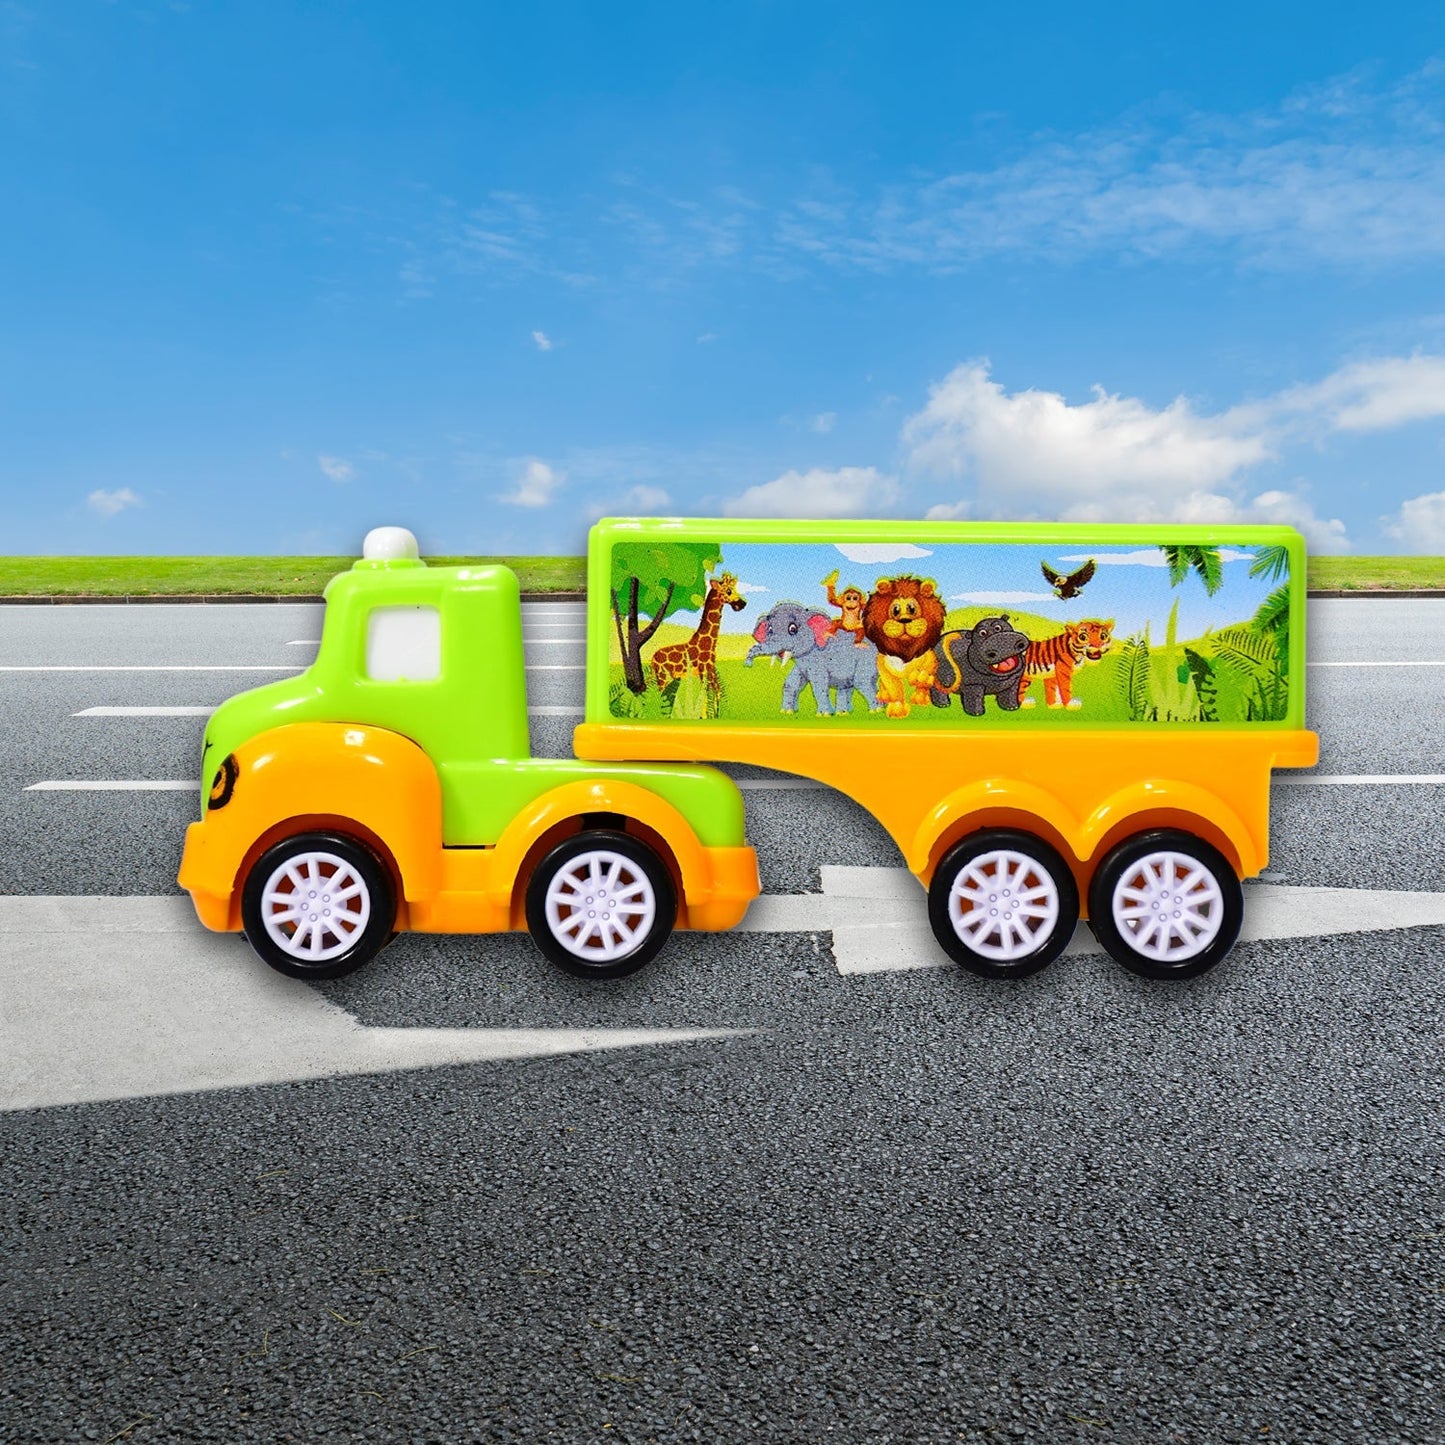 8052 Small Green and yellow Toy Truck. DeoDap